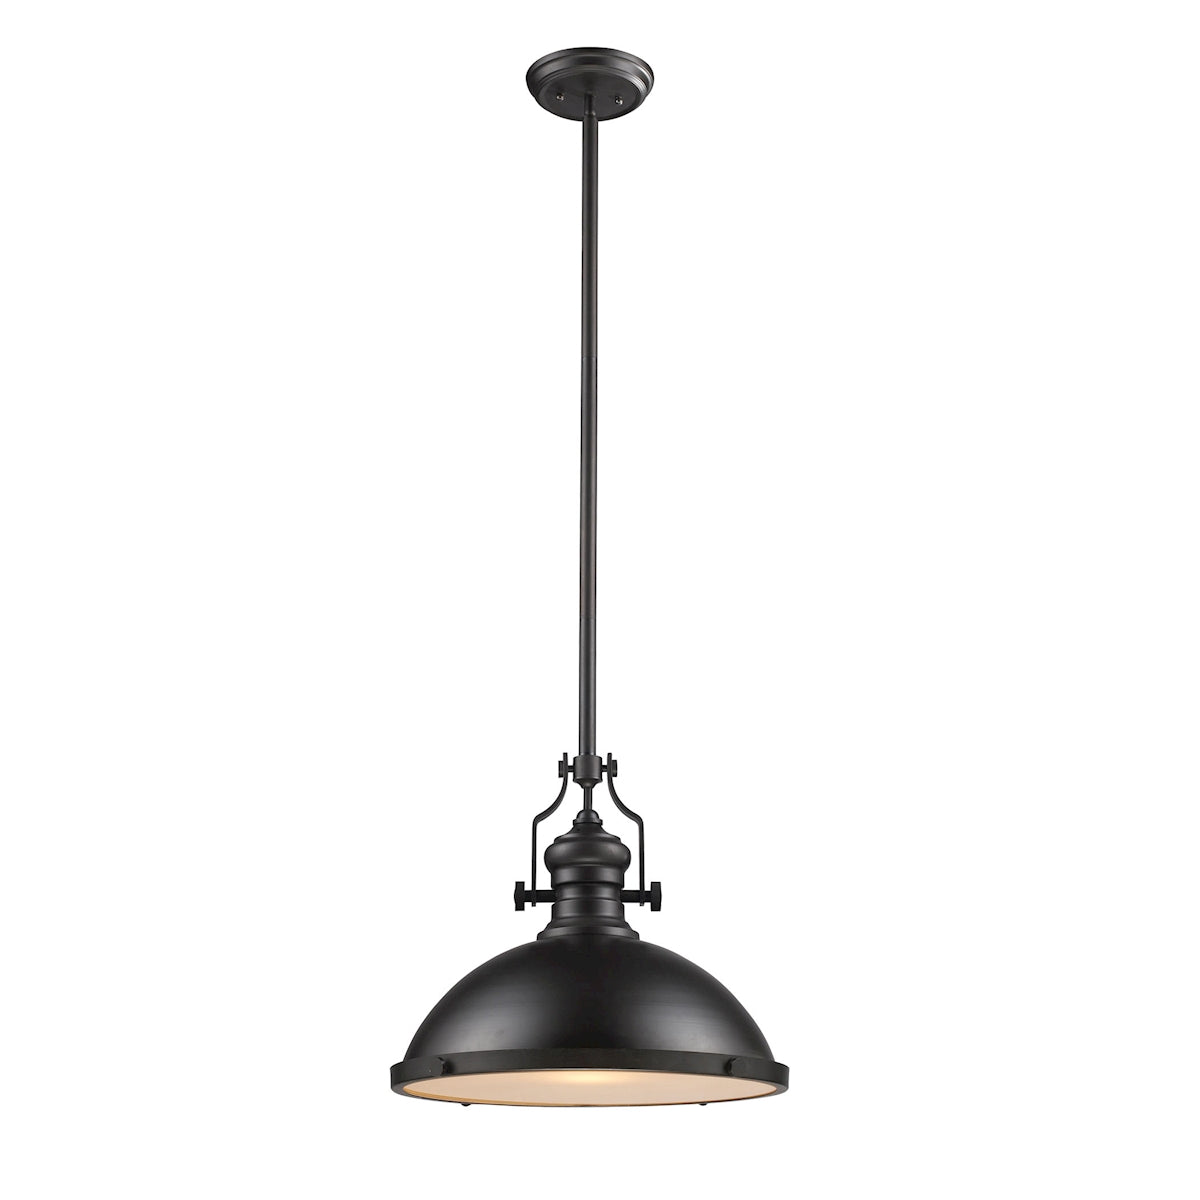 ELK Lighting 66138-1 - Chadwick 17" Wide 1-Light Pendant in Oiled Bronze with Matching Shade